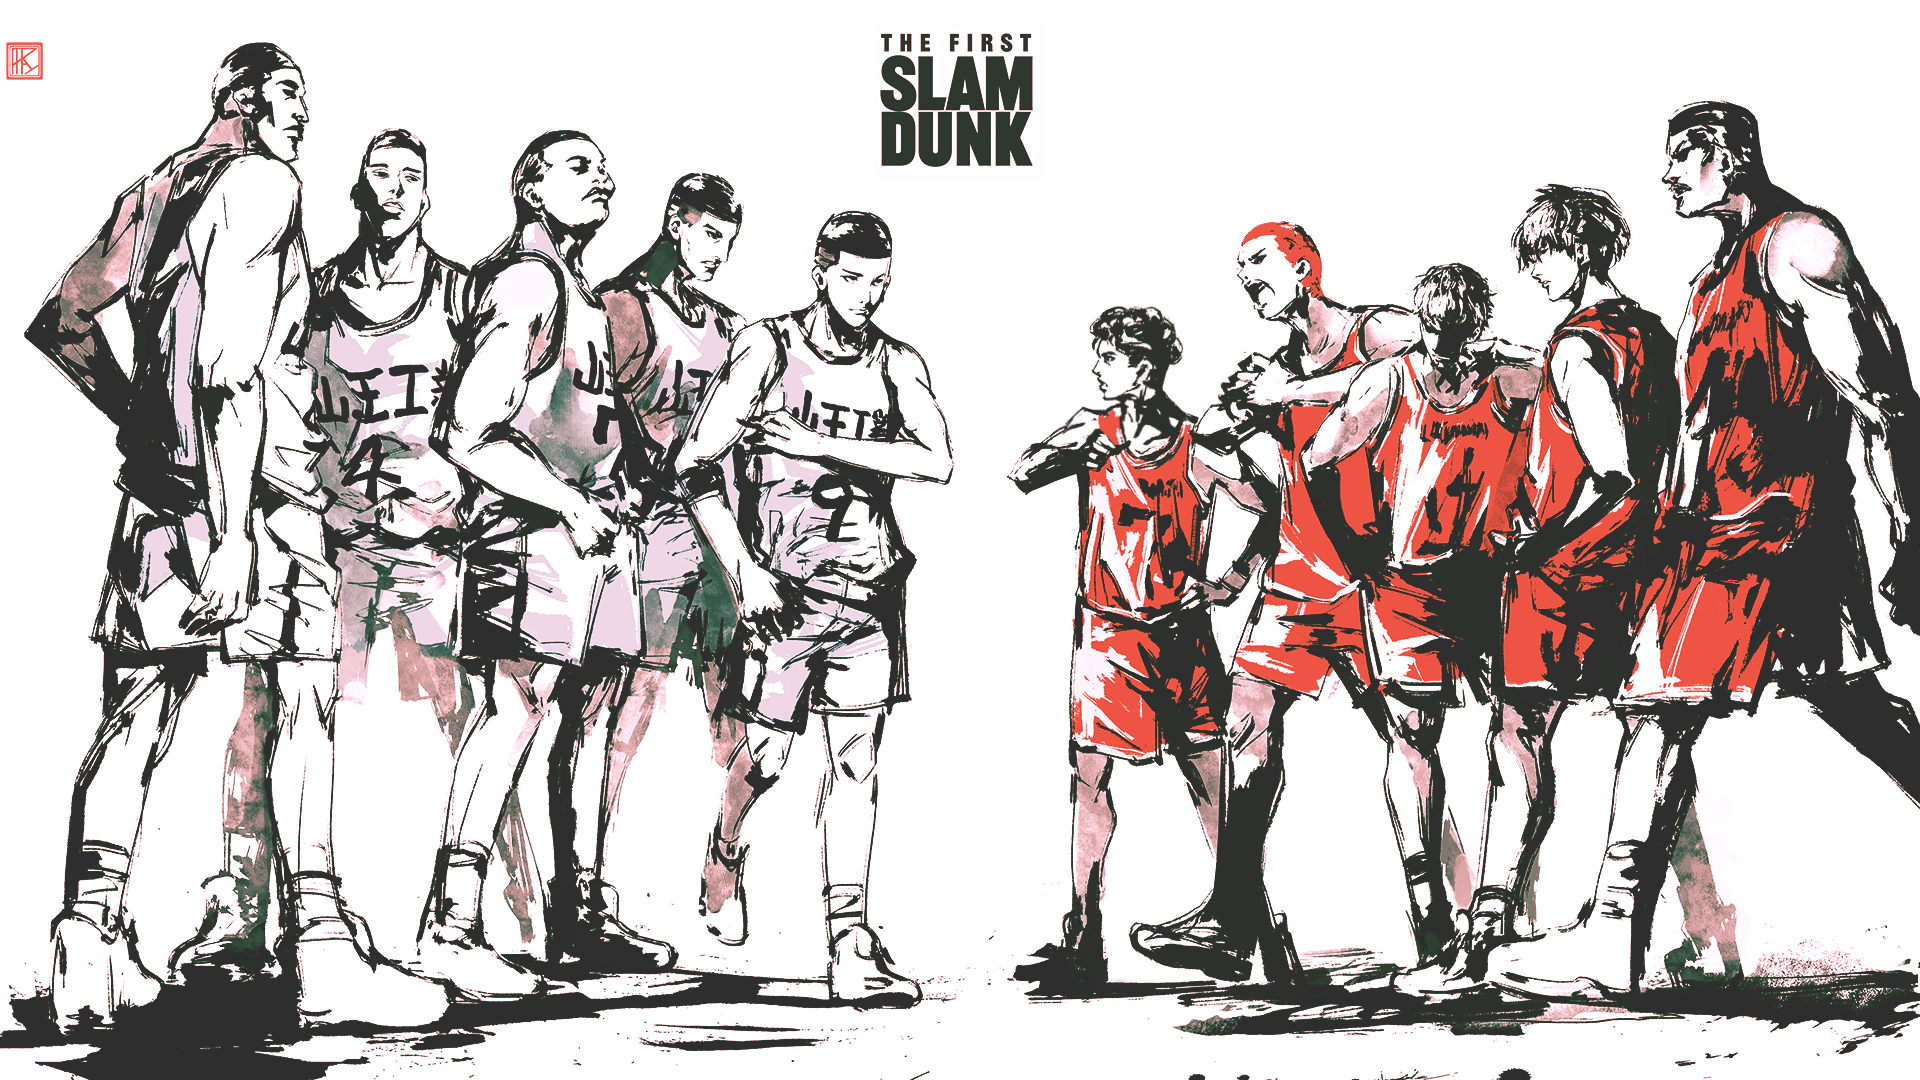 Movie THE FIRST SLAM DUNK HD Wallpaper | Background Image